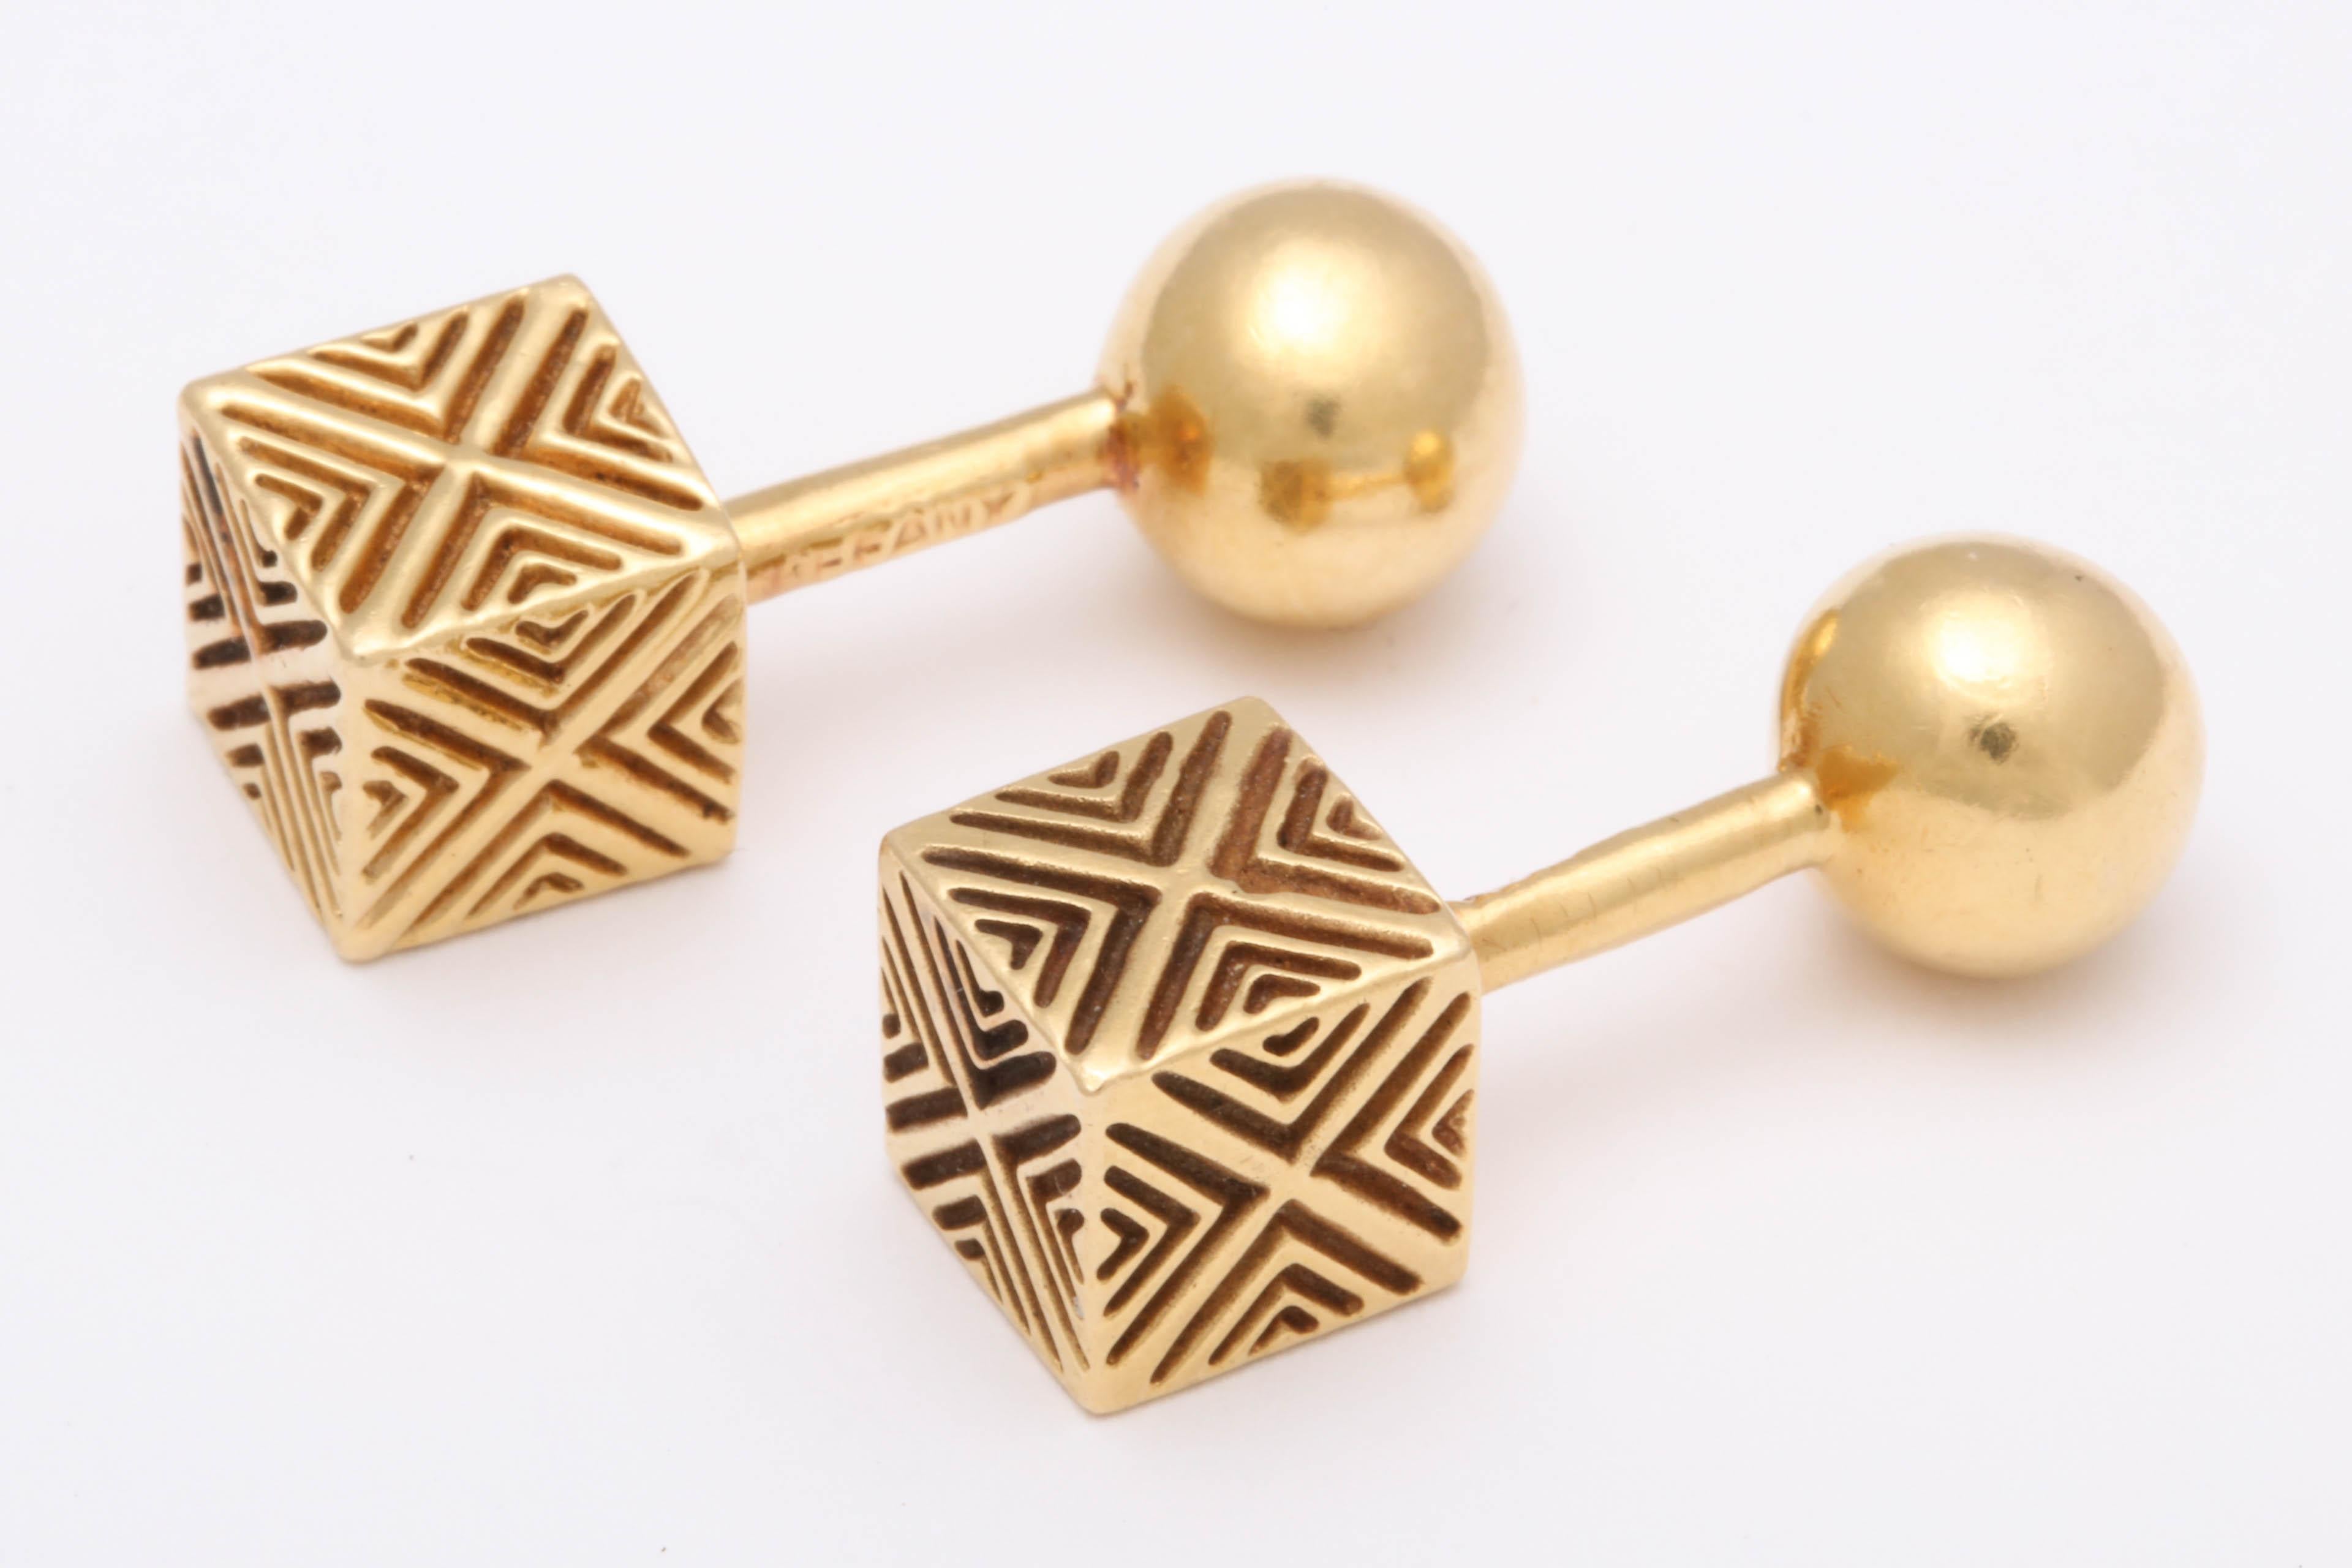 18kt Yellow gold Cube Cuff Links with Engraved Design  terminating in a Round Ball.  Very unusual .  Strong and masculine.